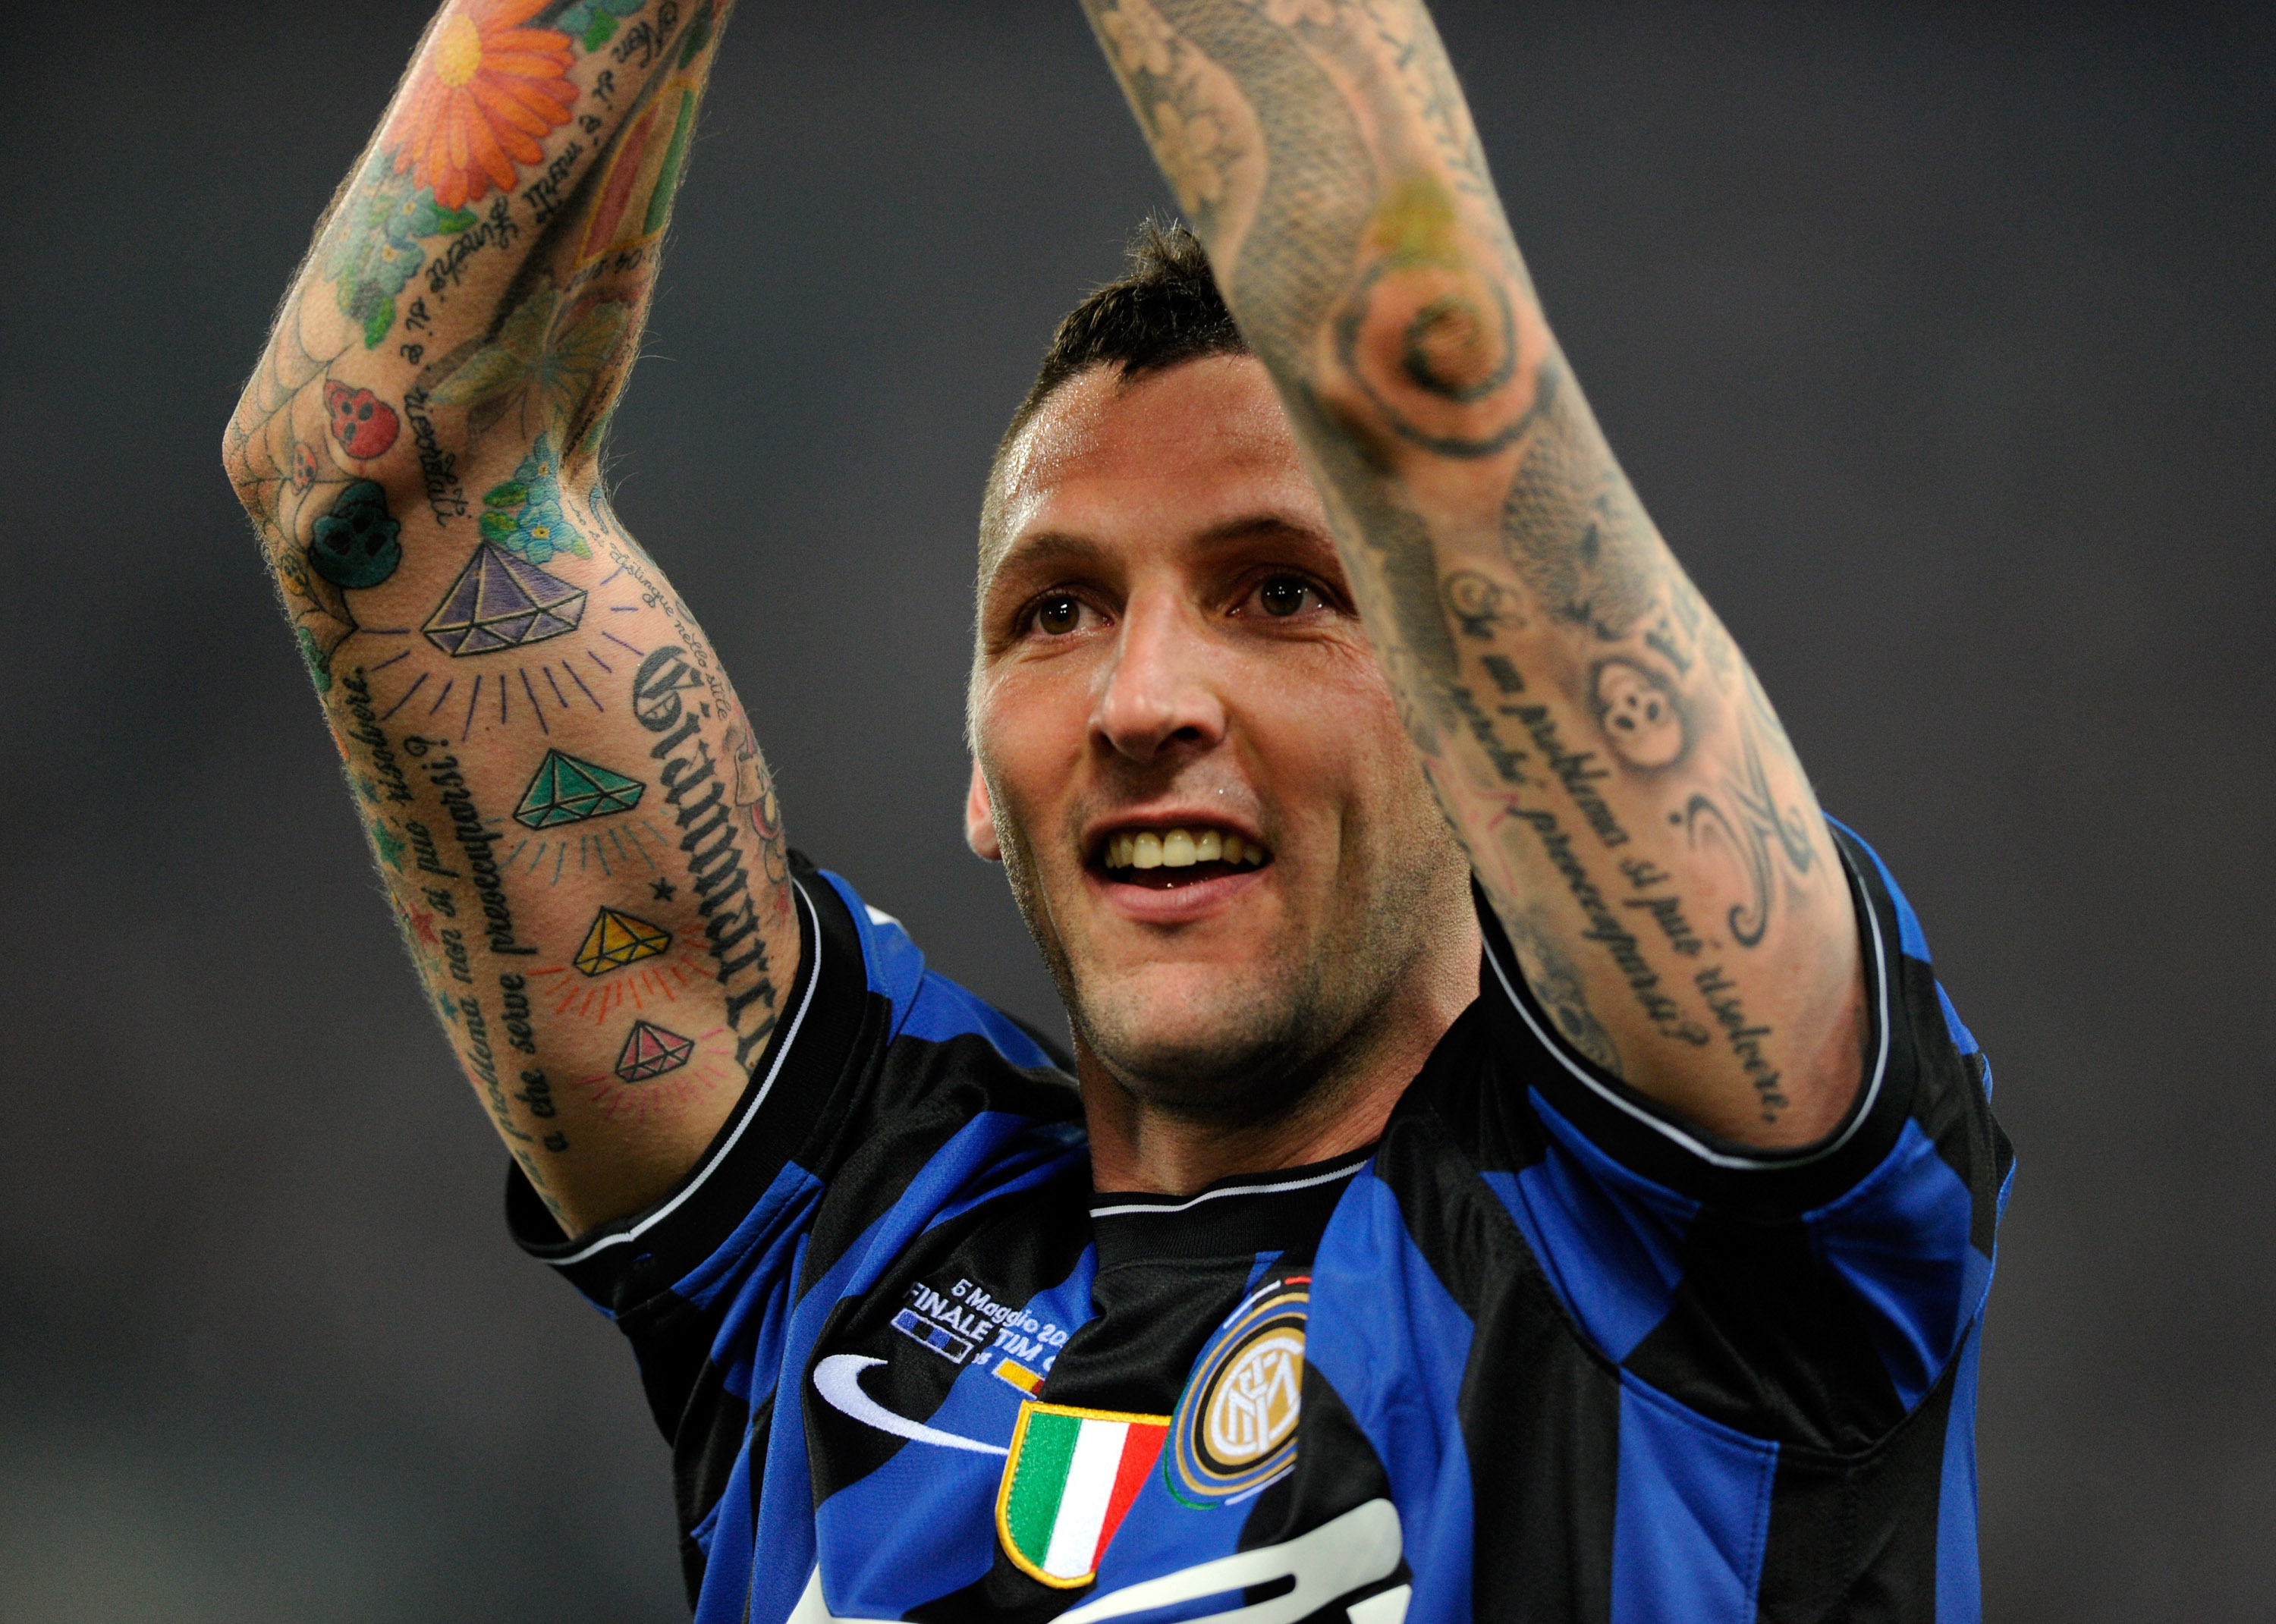 ROME - MAY 05:  Marco Materazzi of Inter Milan celebrates during the Tim Cup final between FC Internazionale Milano and AS Roma at Stadio Olimpico on May 5, 2010 in Rome, Italy.  (Photo by Claudio Villa/Getty Images)